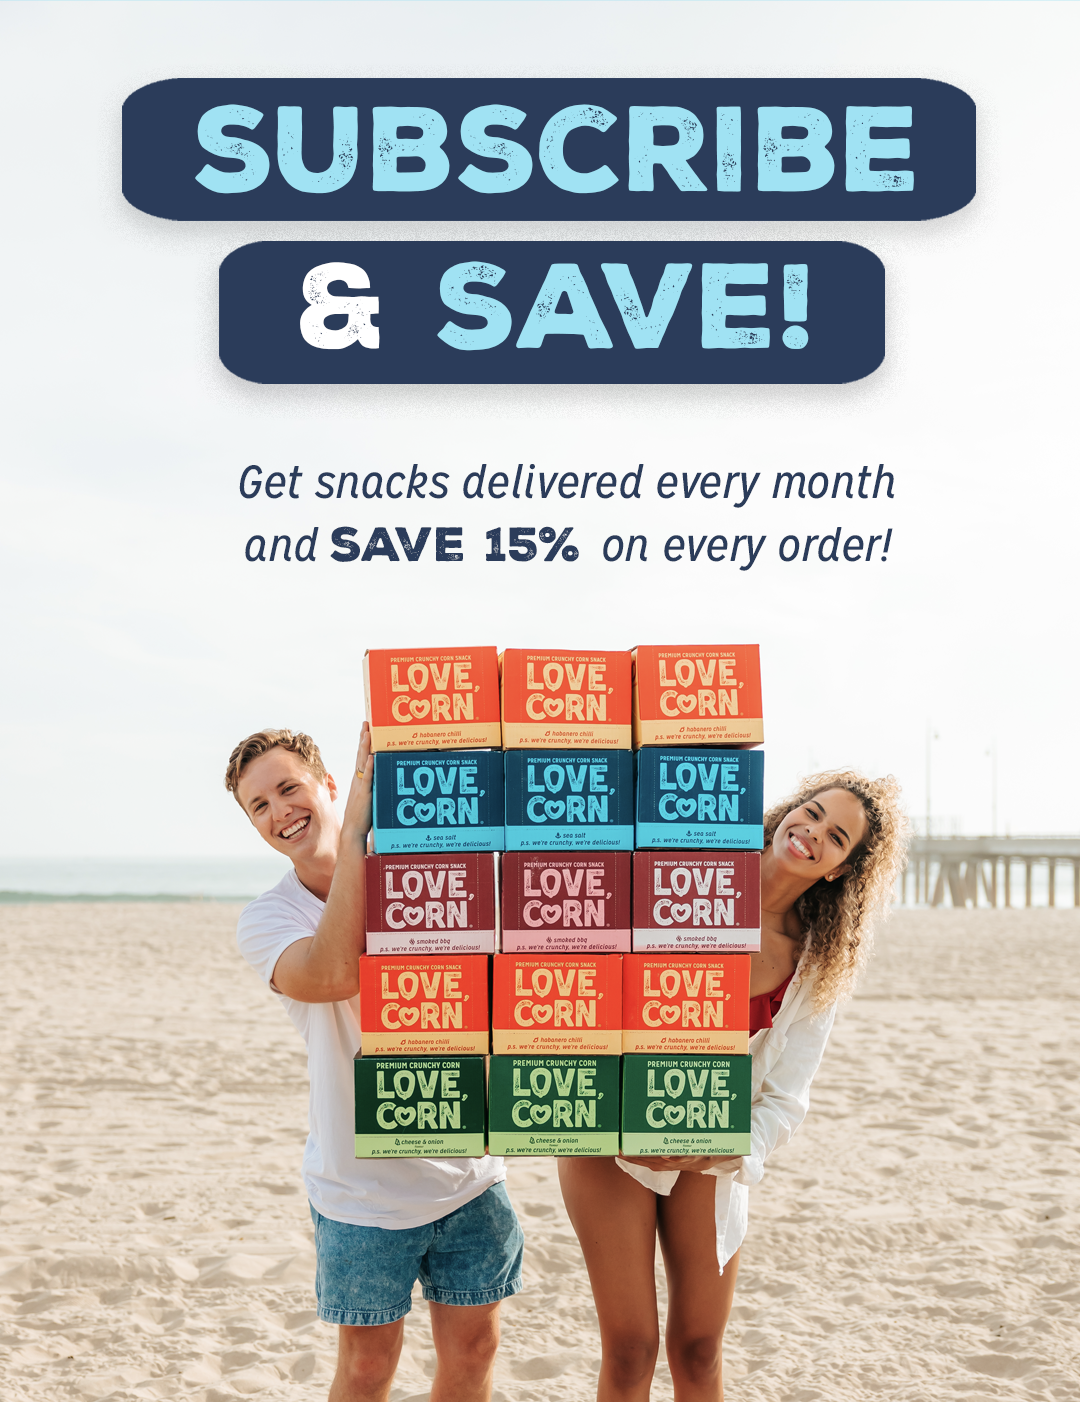 Get snacks delivered every month and save 15% on every order